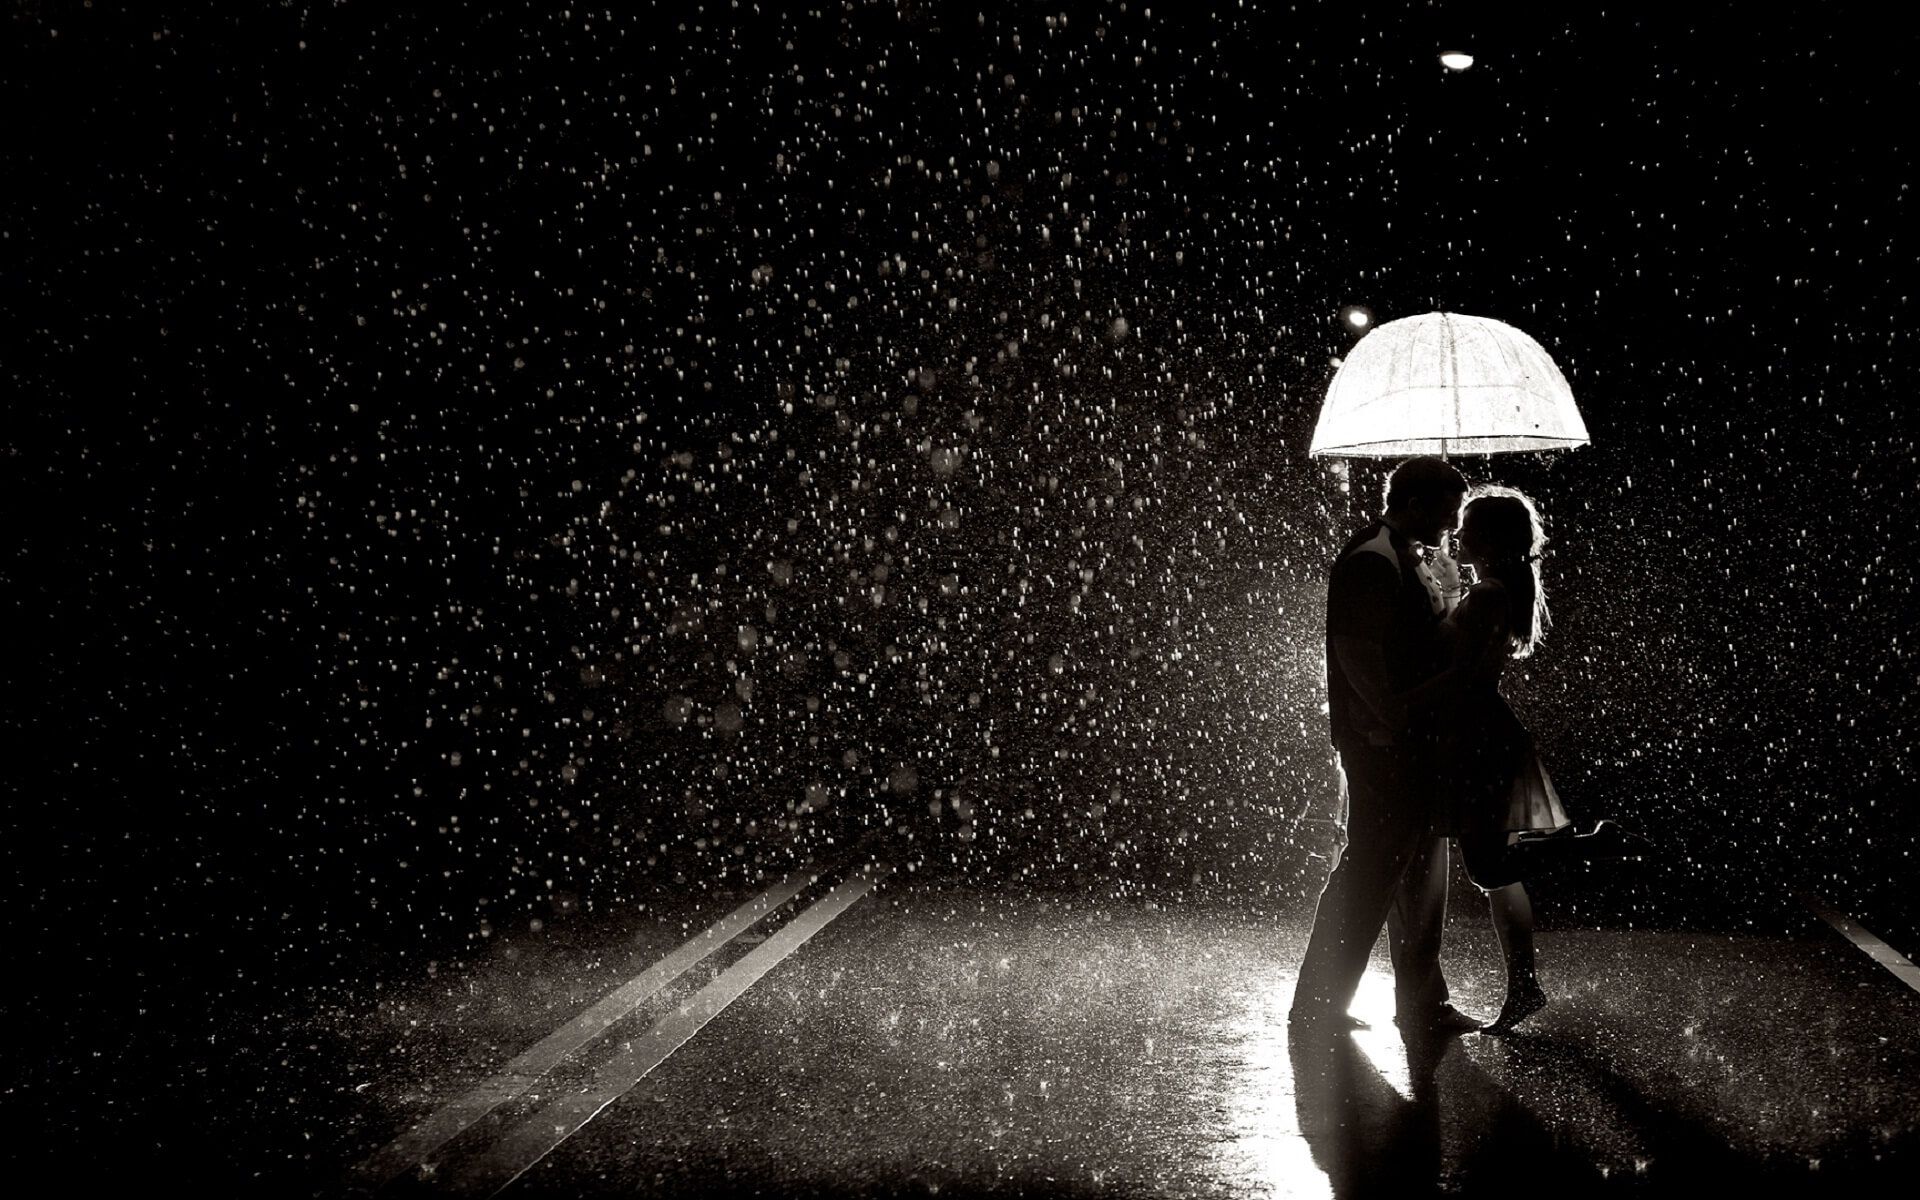 Cute HD Love and Romance Picture Of Couples In Rain